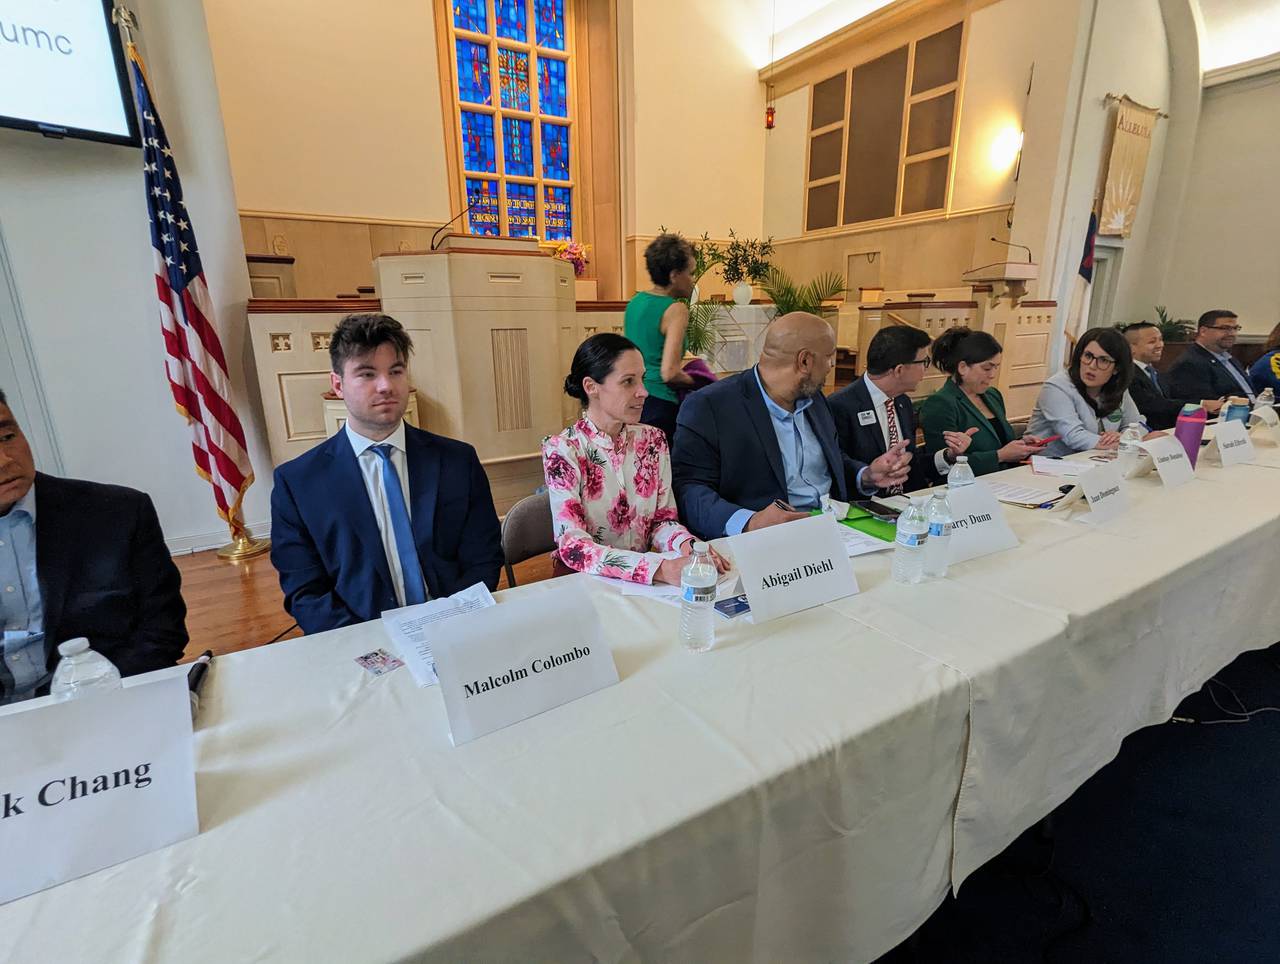 Candidates sat at a long table covered by a white cloth inside the Eastport United Methodist Church on April 17, creating a tableau the pastor admitted looked unexpectedly like the last supper.